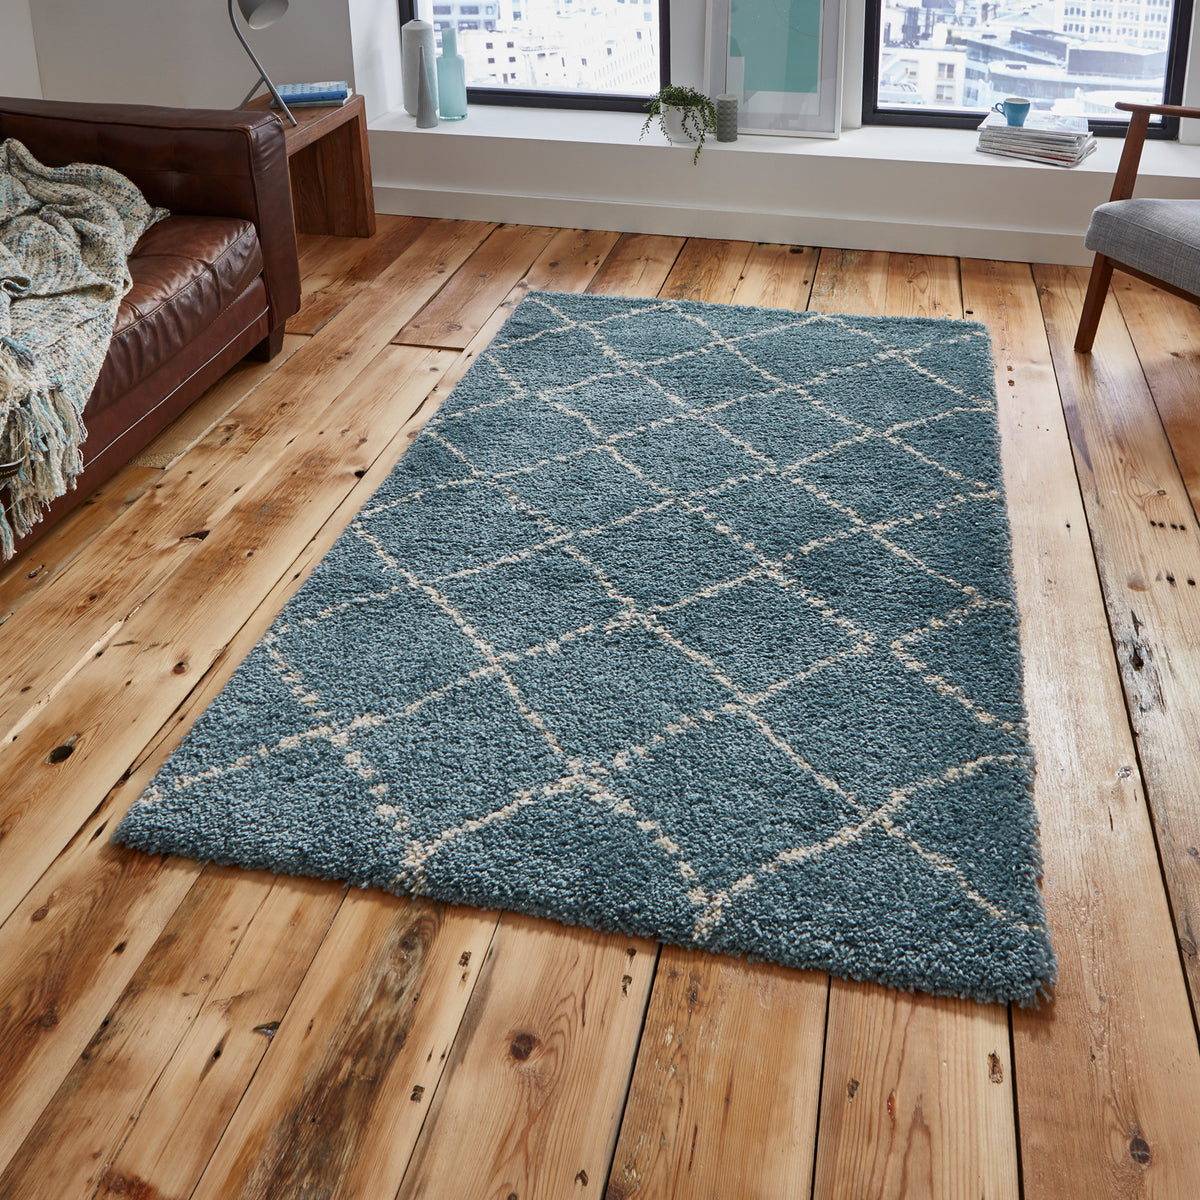 Webster Teal Diamond Two Toned Rug for living room or bedroom